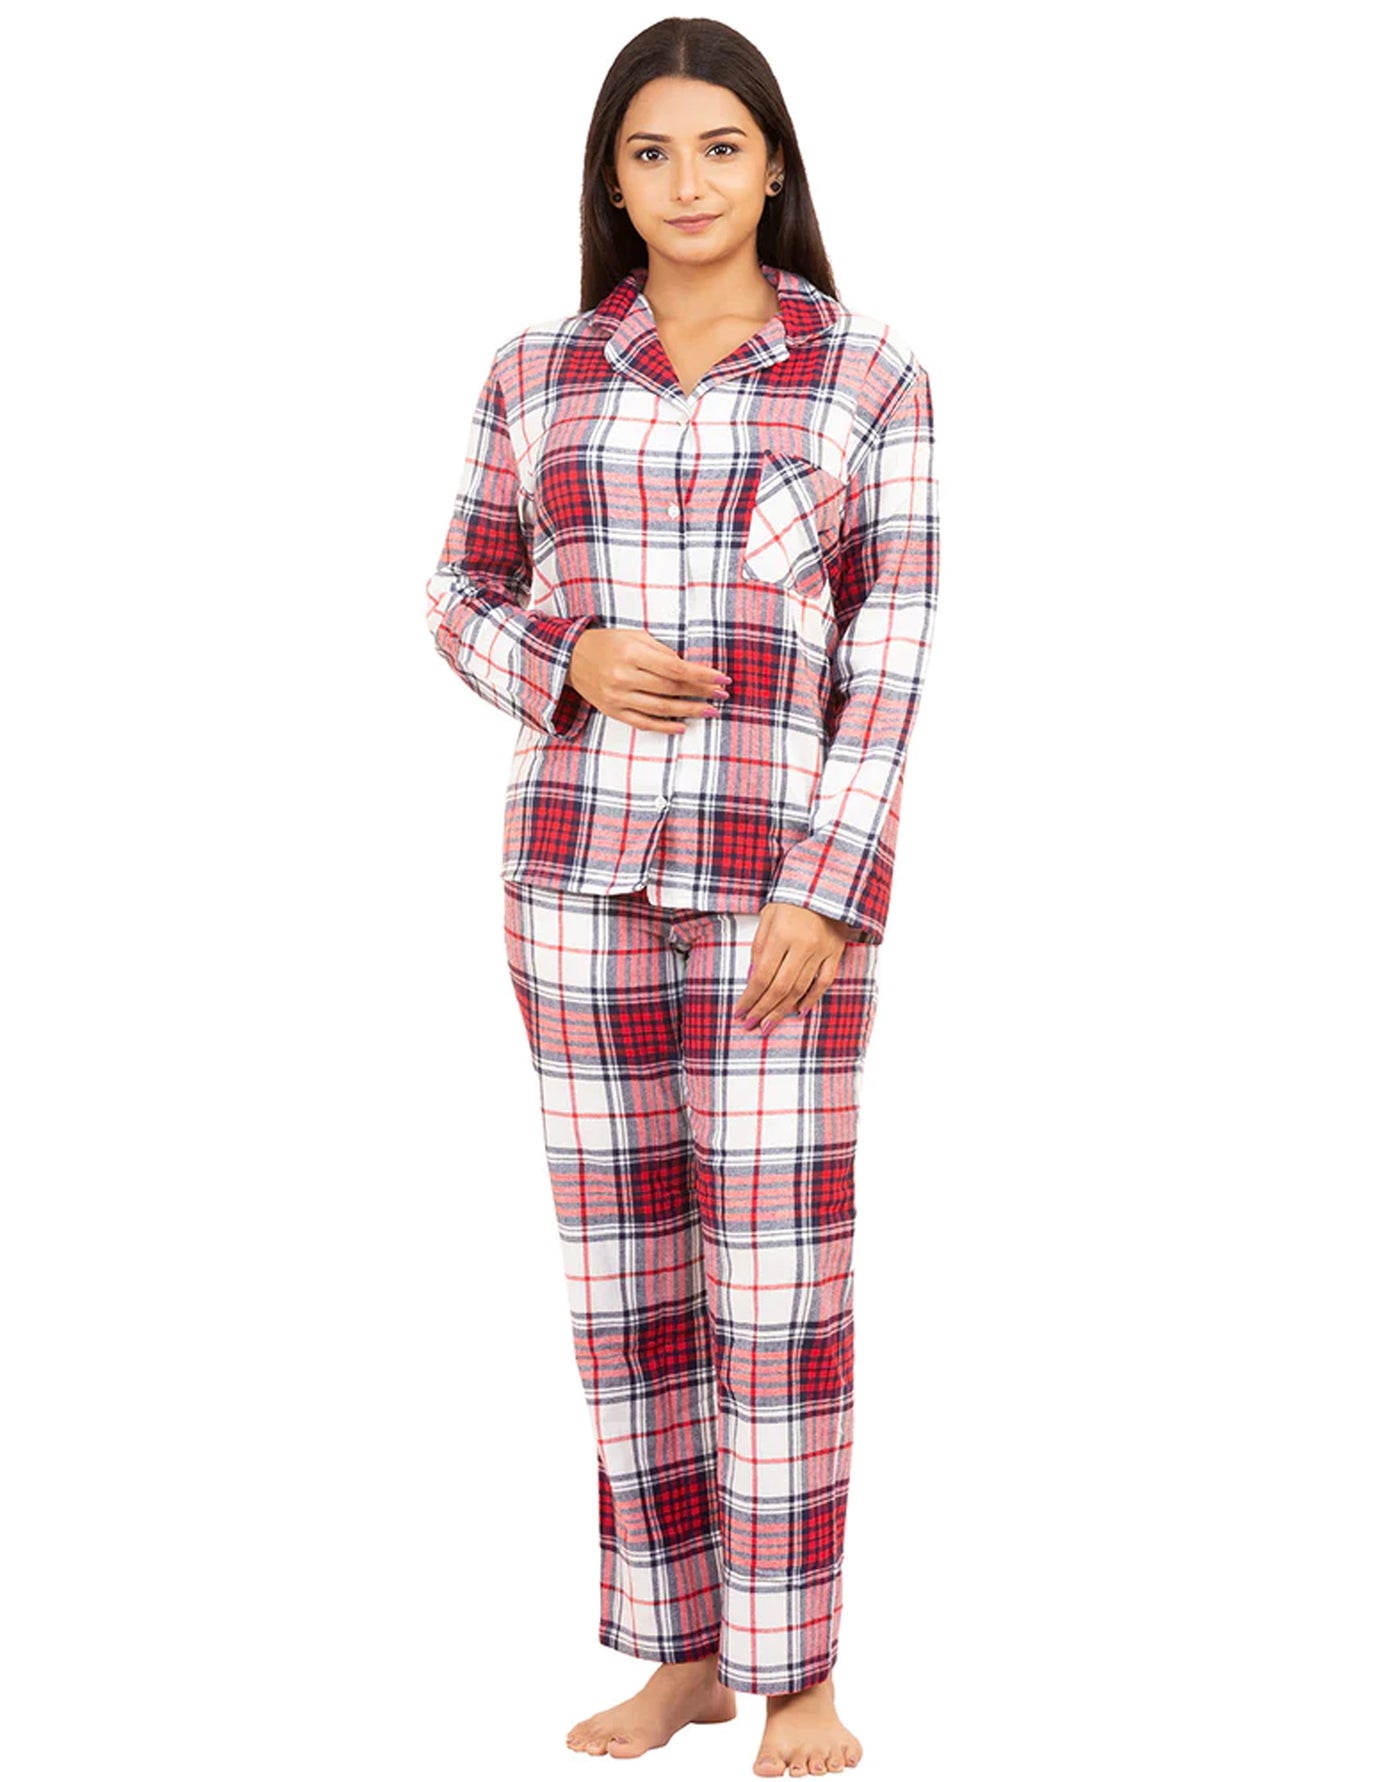 Night Suit Set for Women-Red and White Checked